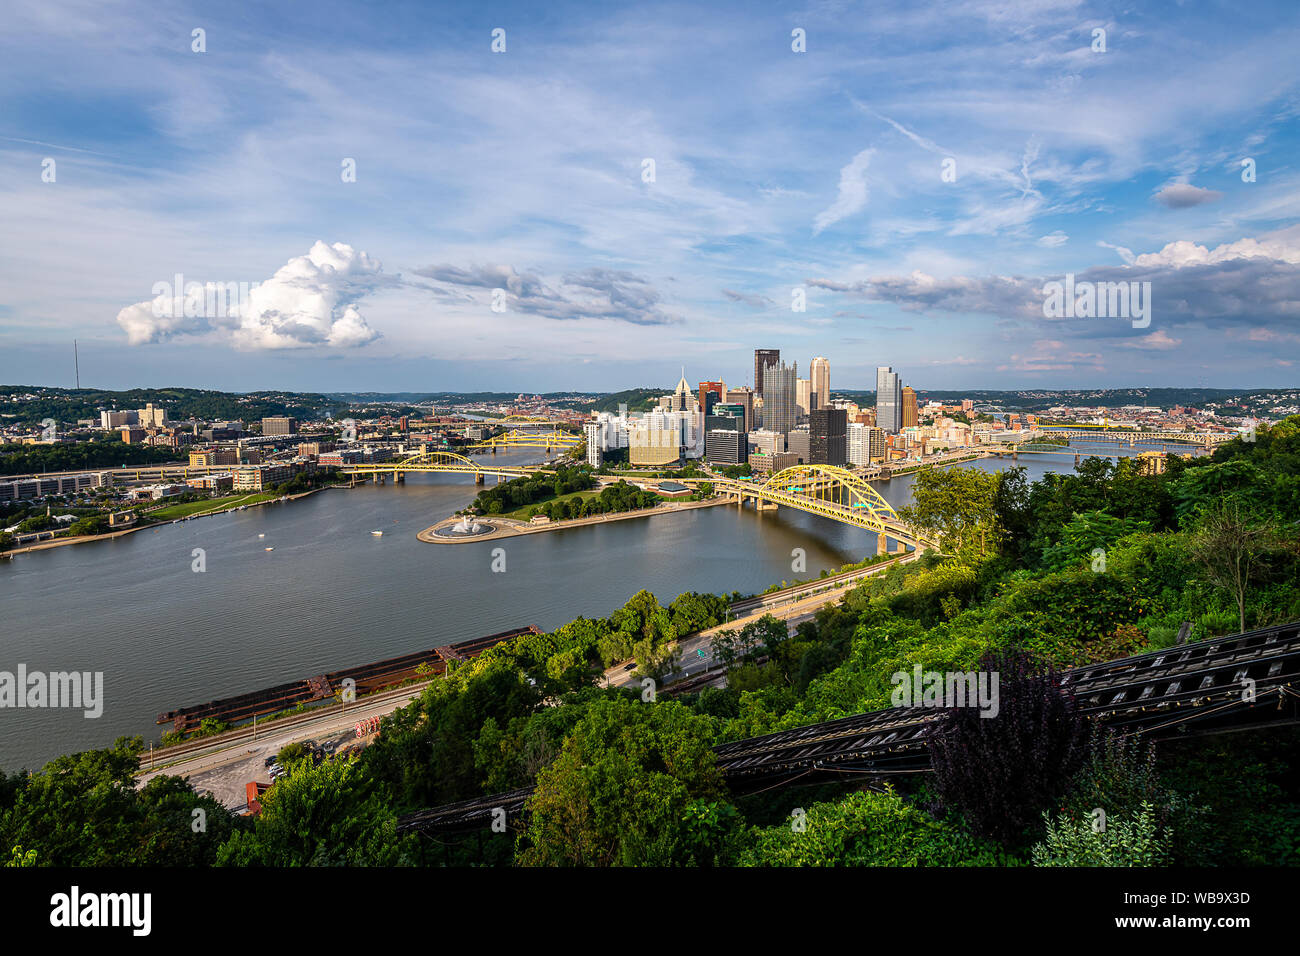 Duquesne Incline at Upper Station Stock Photo